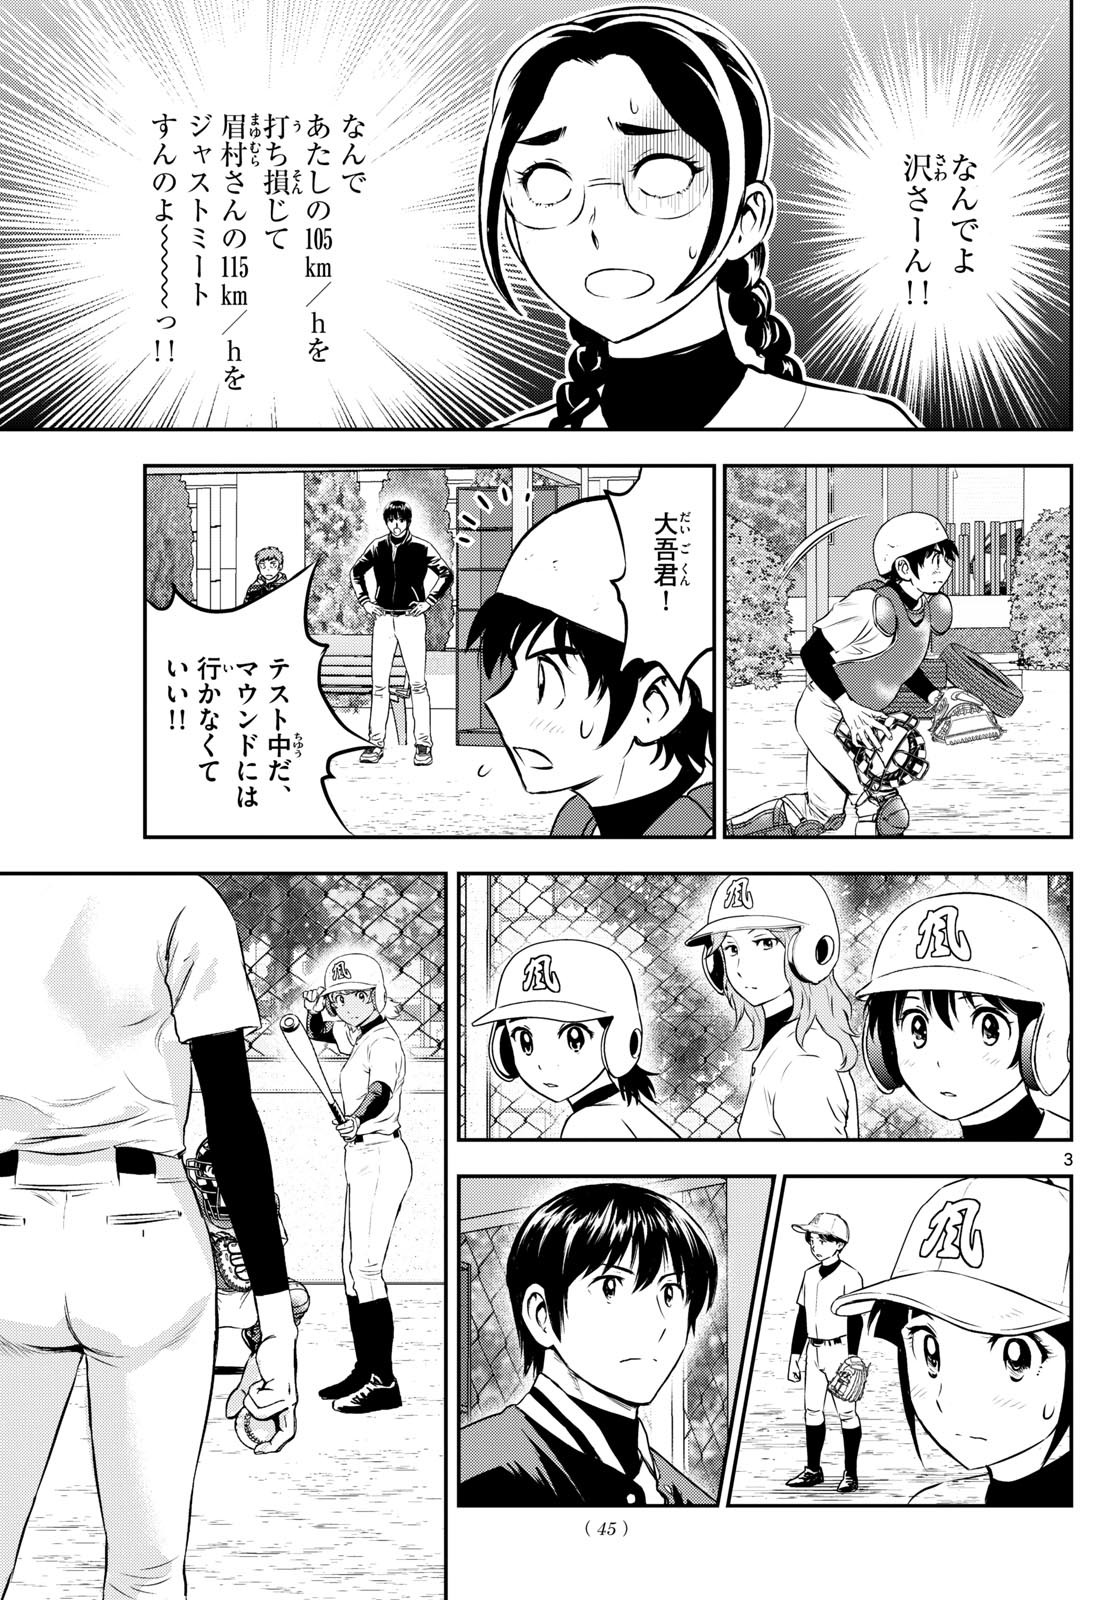 Major 2nd - メジャーセカンド - Chapter 281 - Page 3